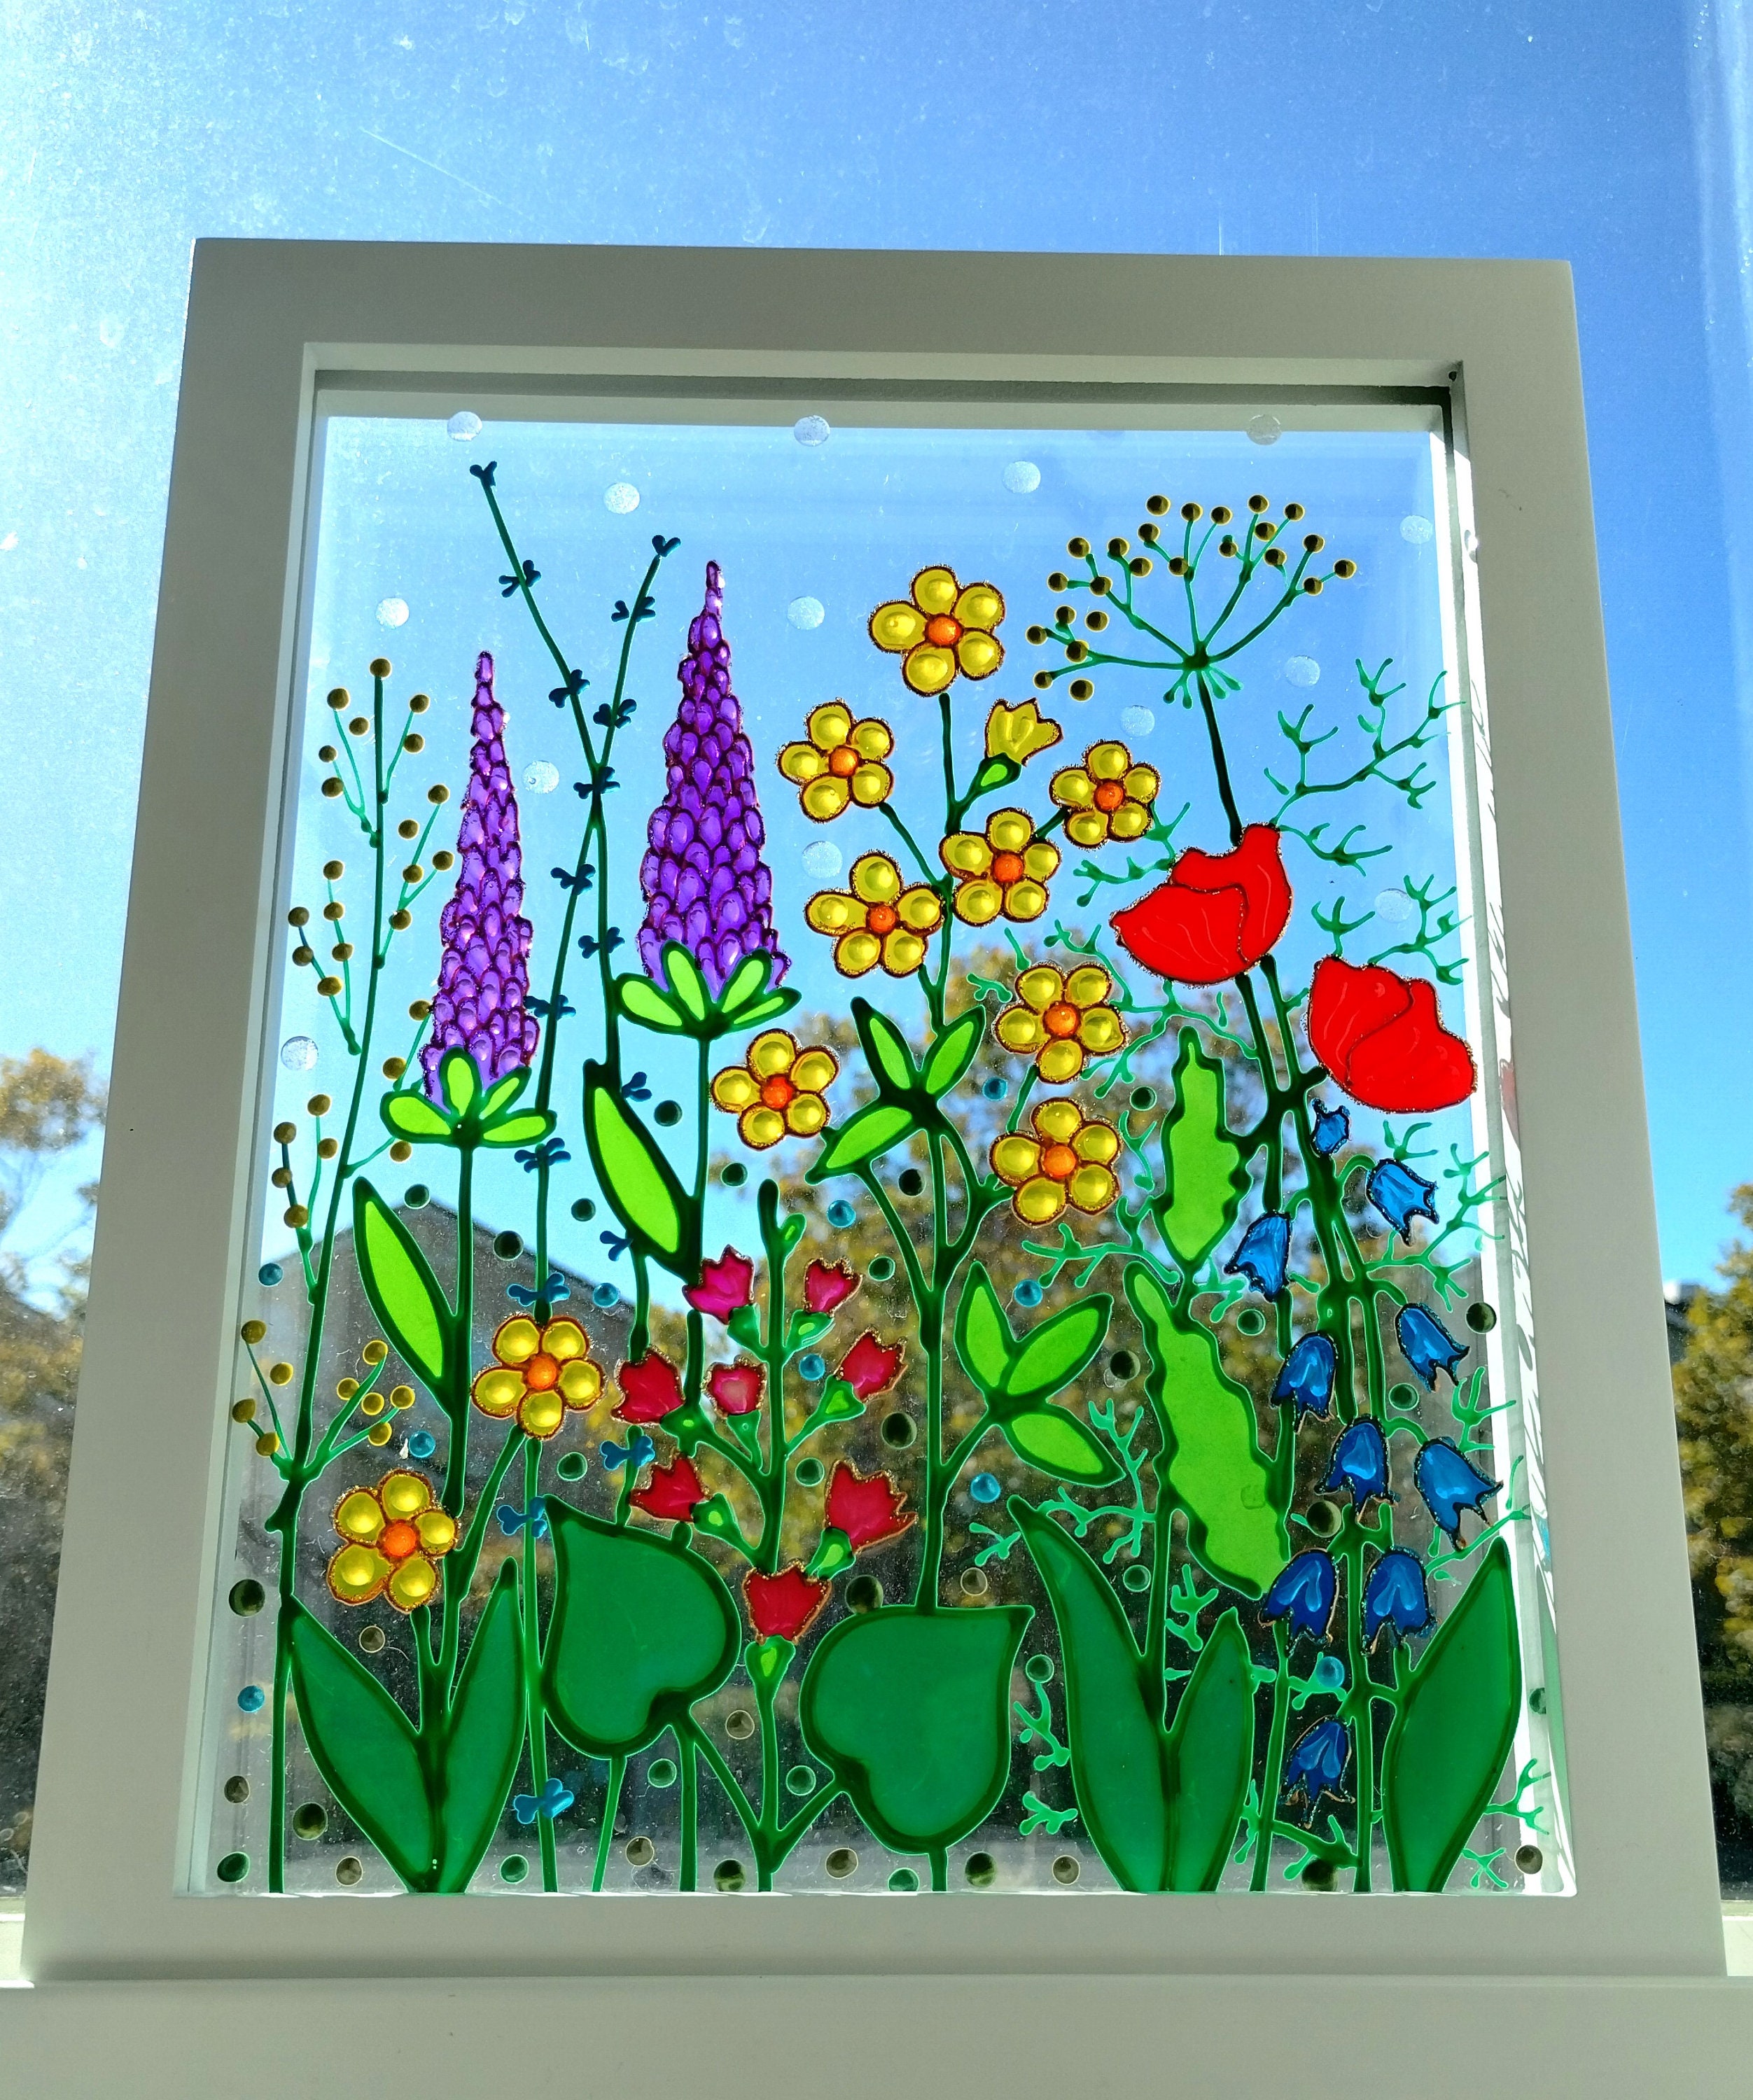 jungle green - Google Search  Painting on glass windows, Violet paint,  Window painting